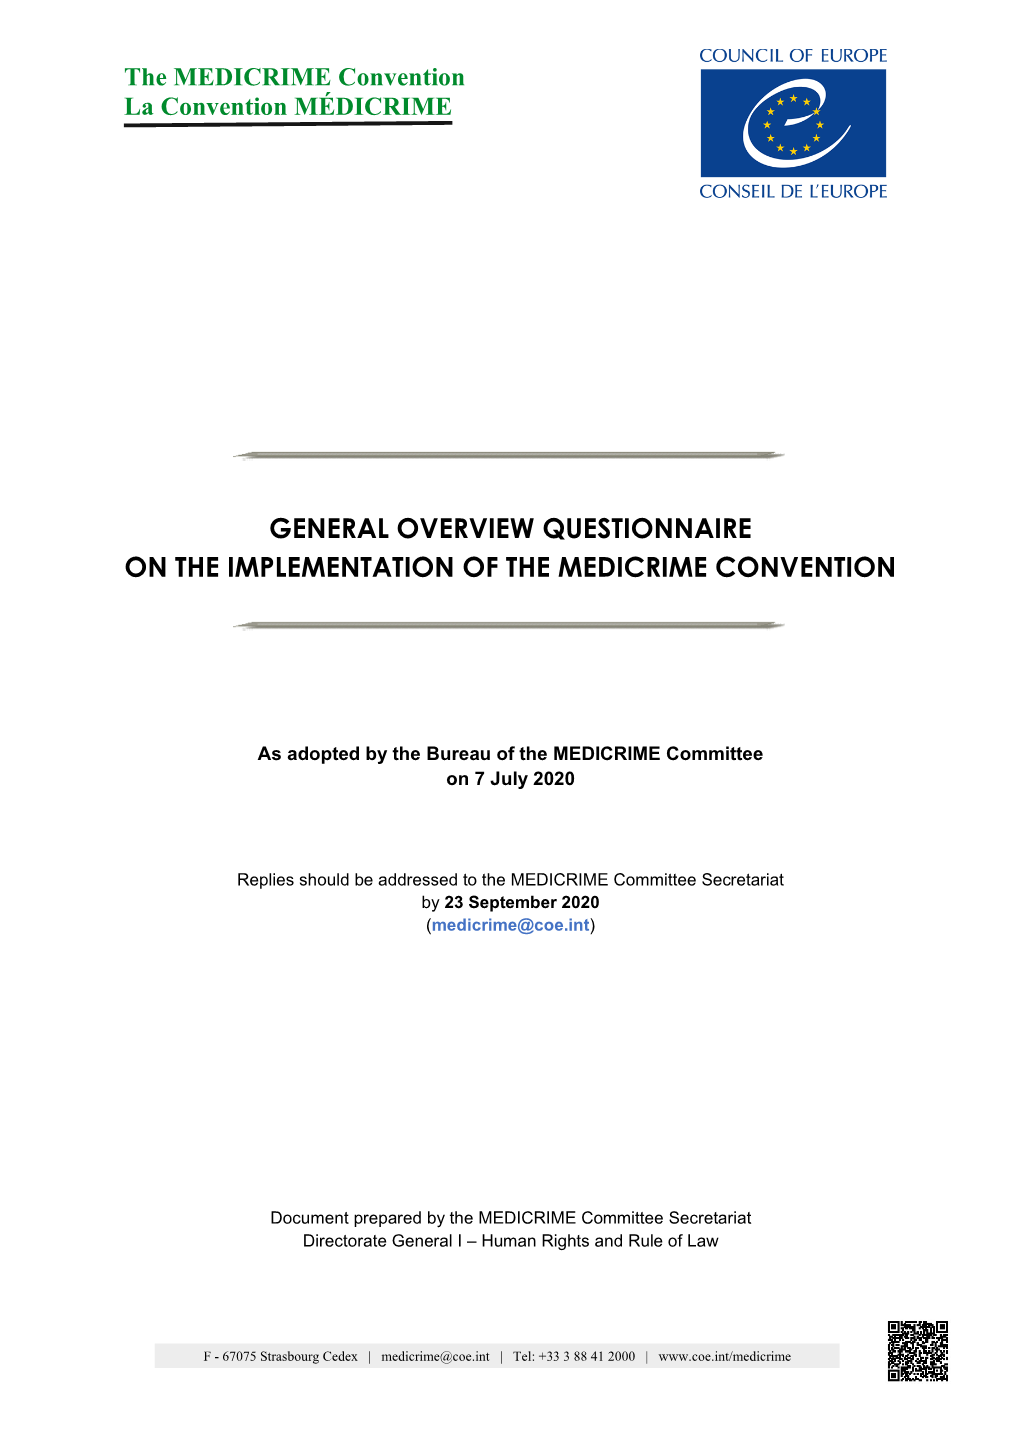 General Overview Questionnaire on the Implementation of the Medicrime Convention